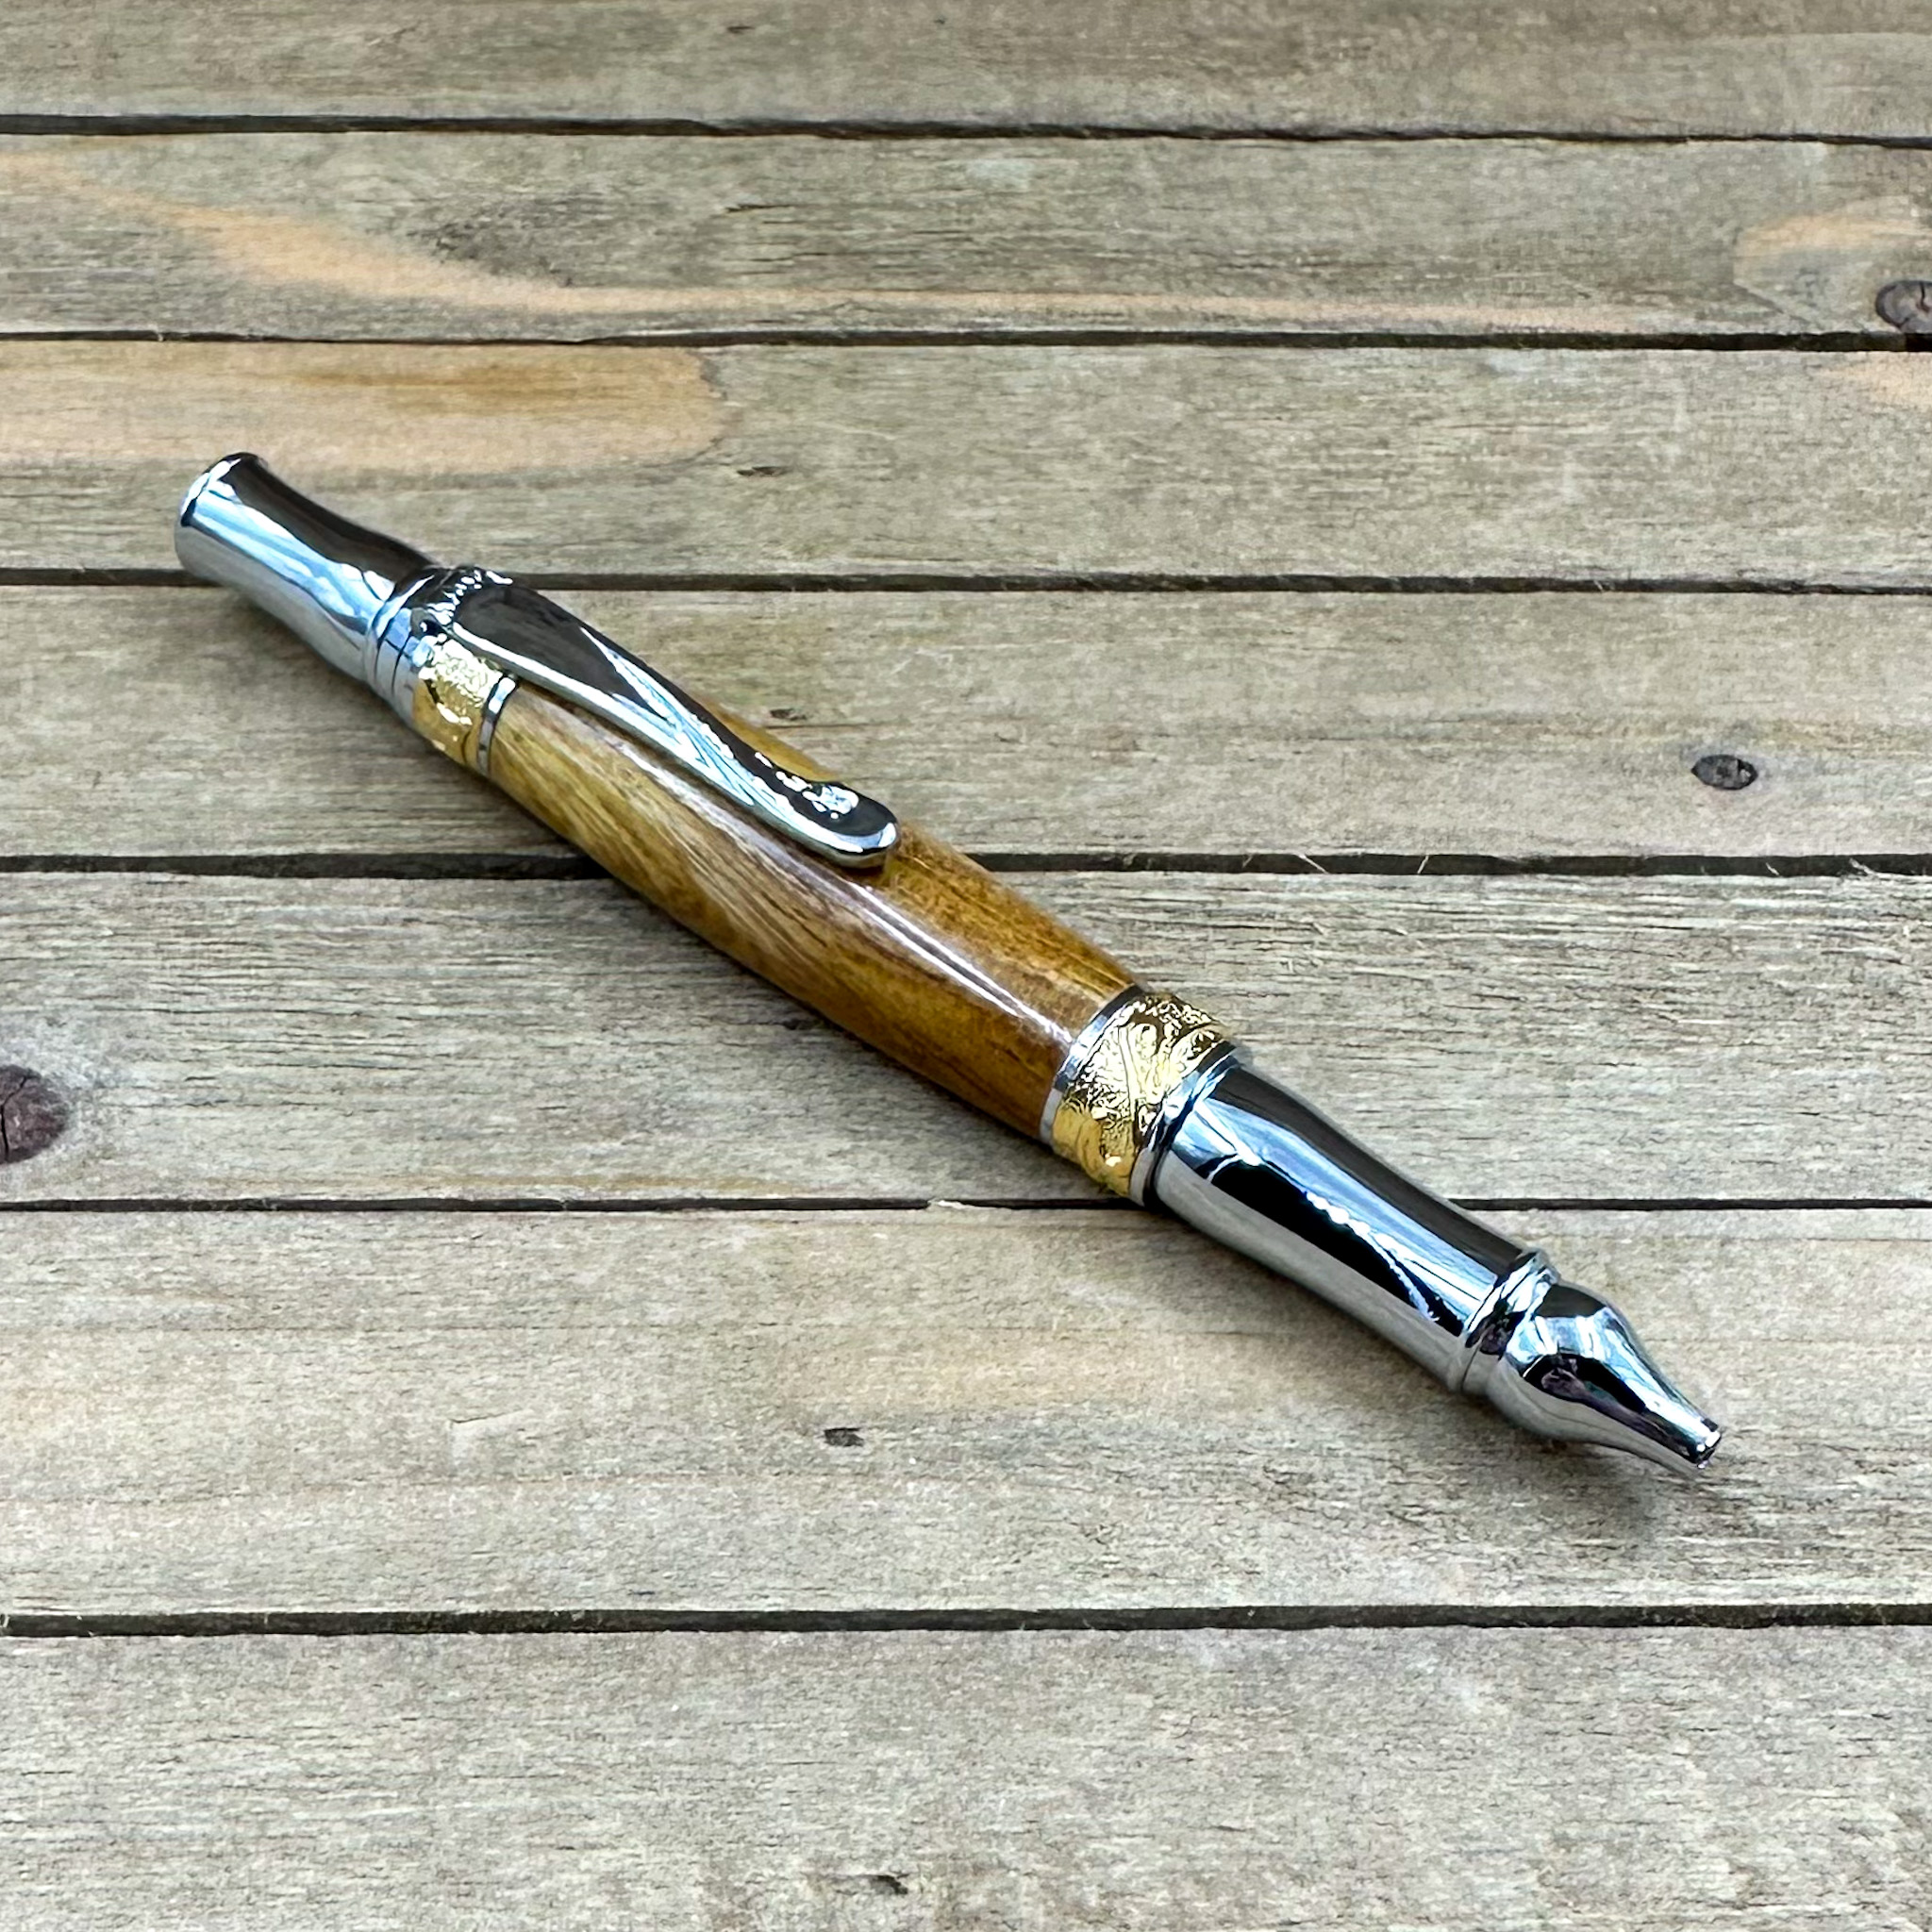 Handcrafted Nouveau Sceptre Pen in Redbud Wood - Elegant and Unique ...